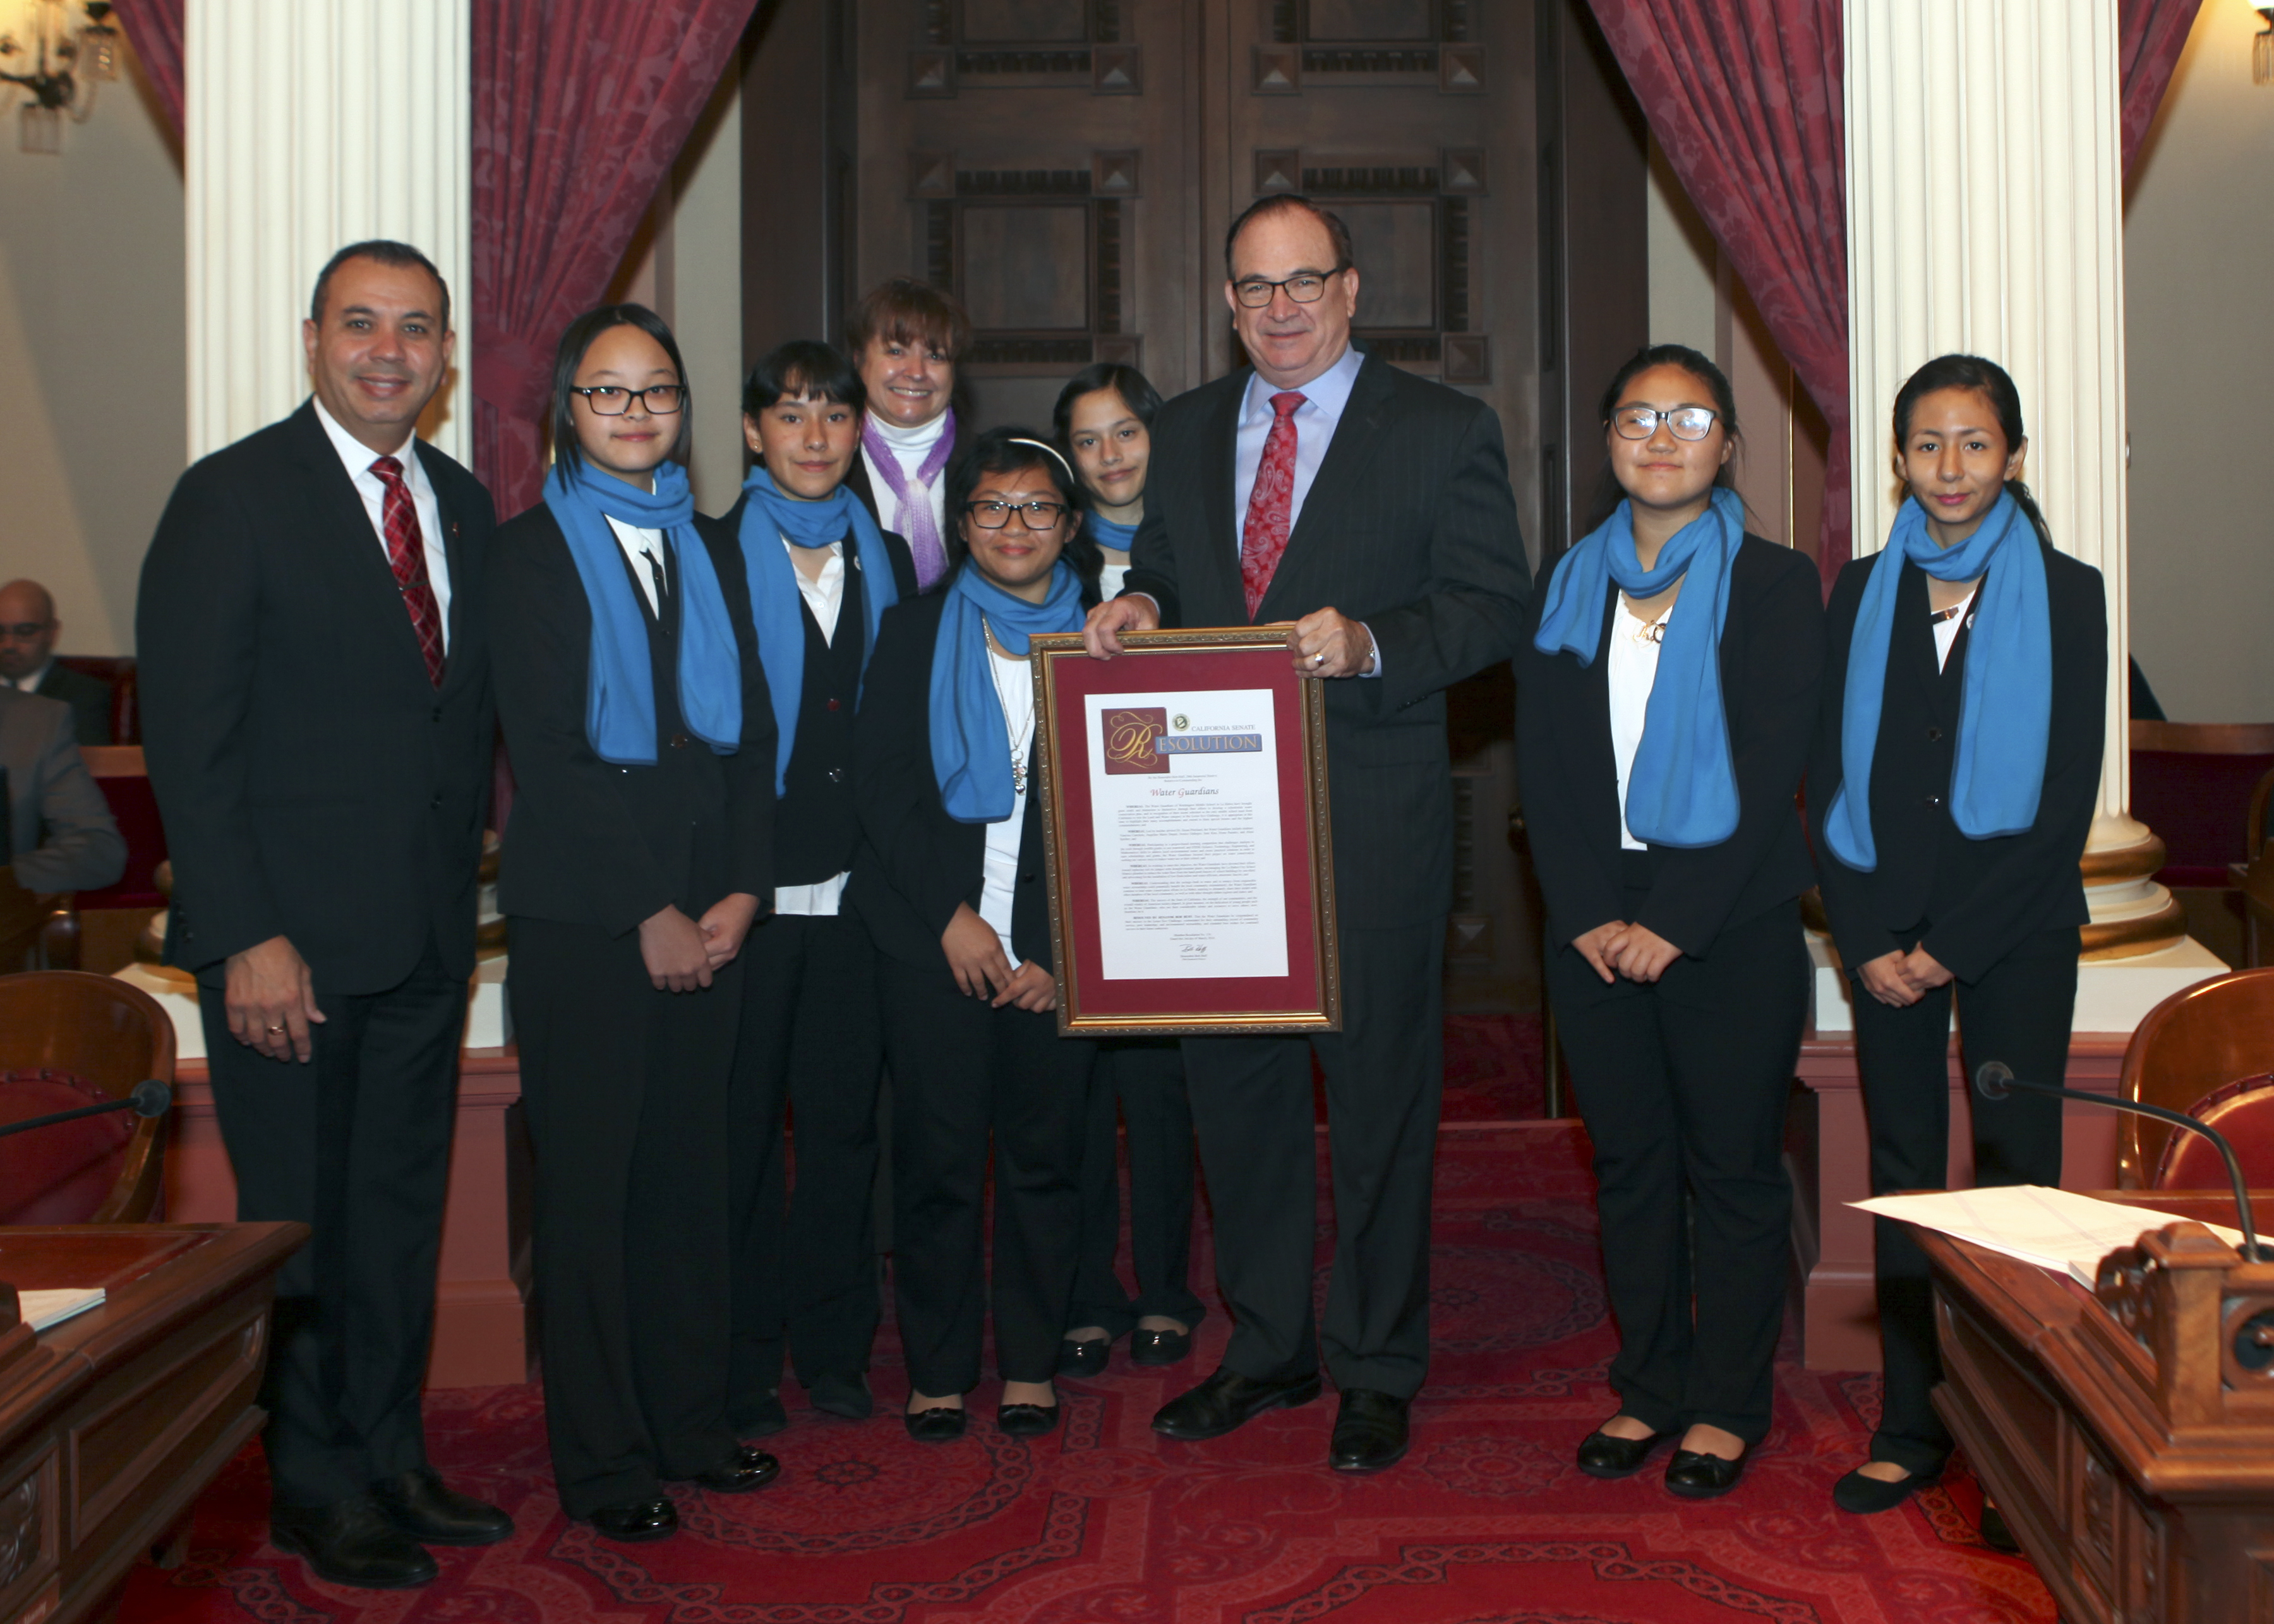 Students from Washington Middle School in La Habra being honored by state Senator Bob Huff